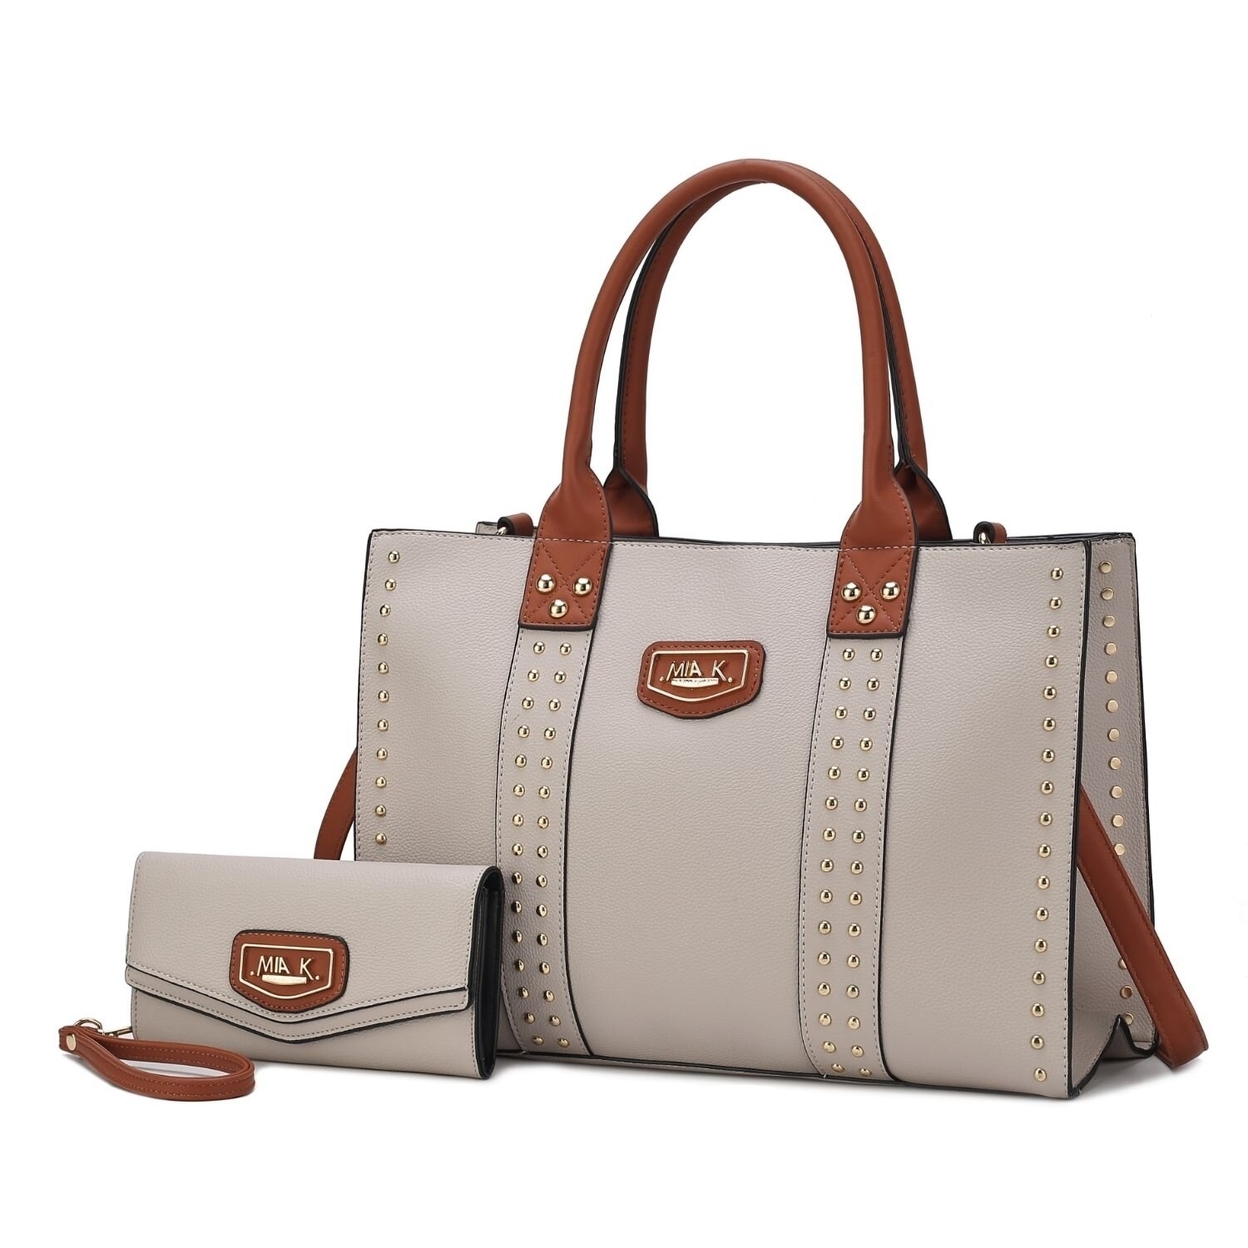 MKF Collection Davina Vegan Leather Women's Tote Handbag By Mia K With Wallet -2 Pieces - Taupe